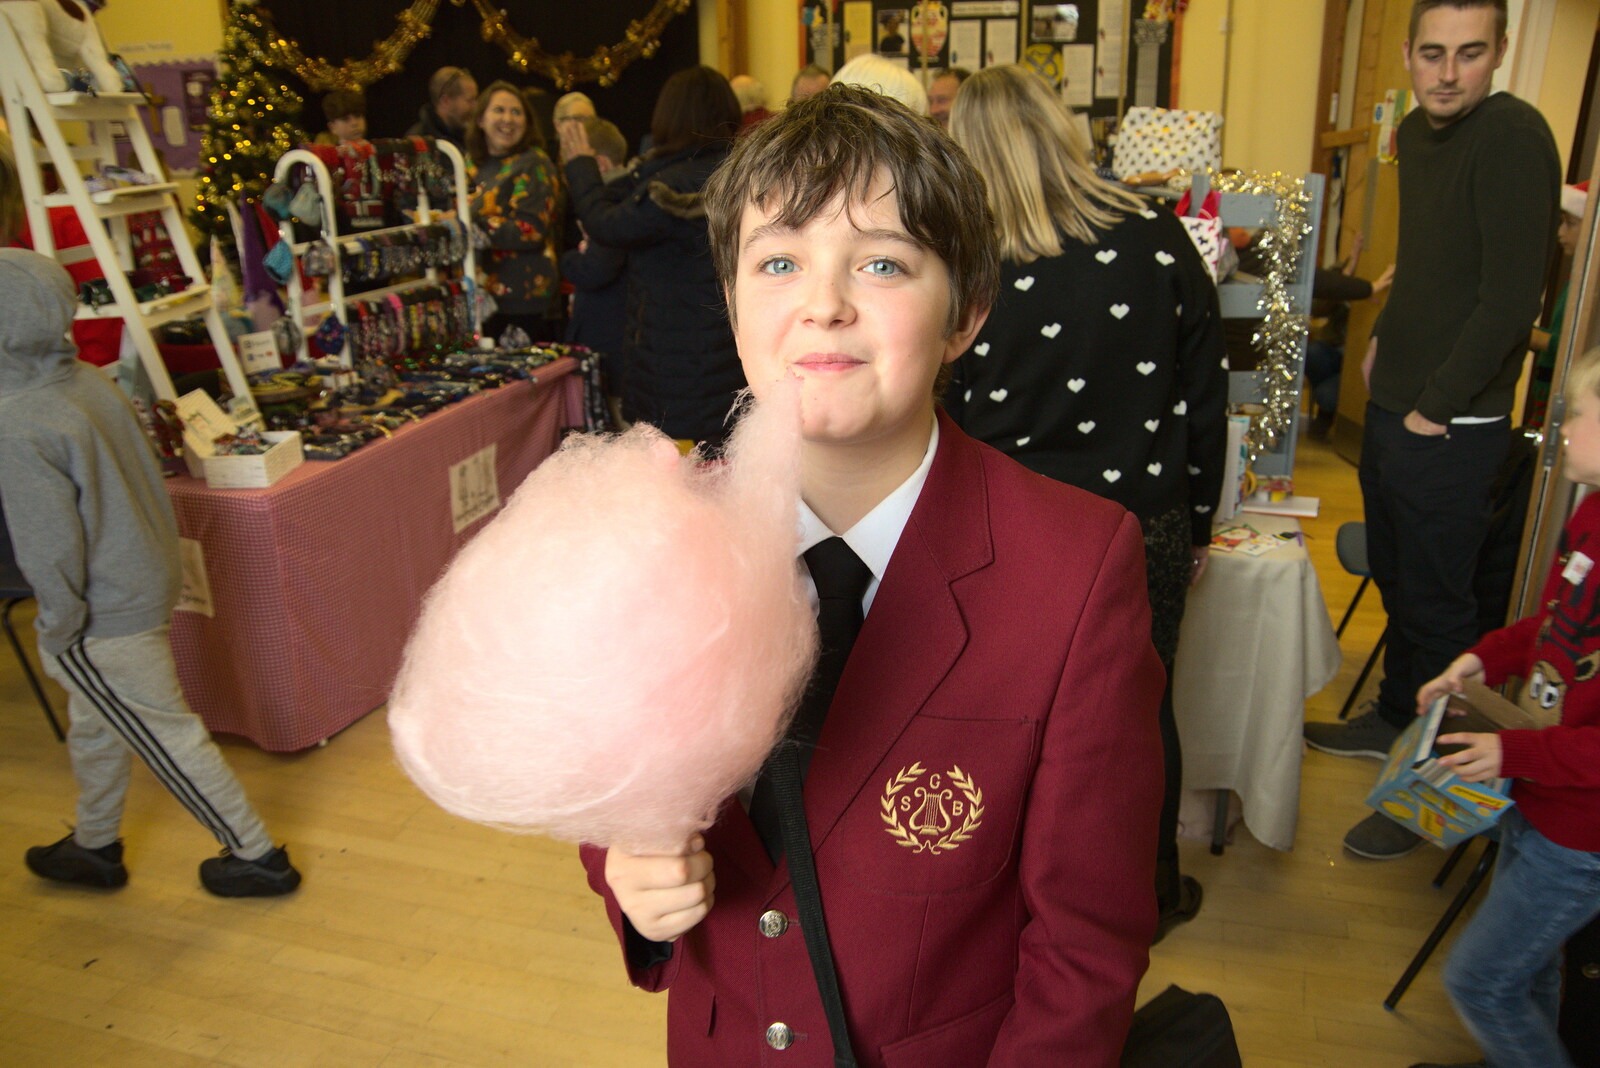 Fred's scored some candy floss from Lunch in Norwich and the GSB at Gislingham, Suffolk - 26th November 2022